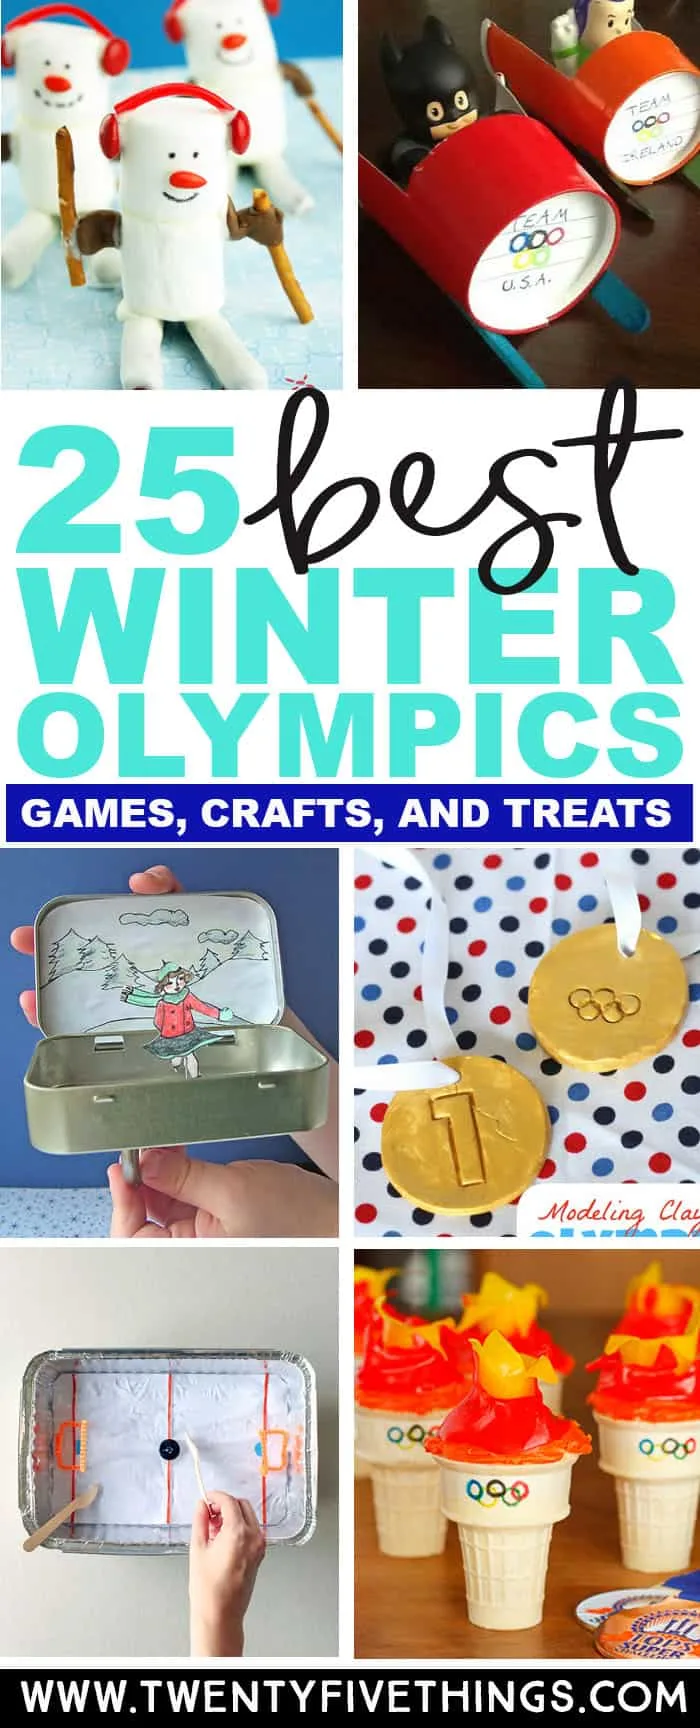 This is the best collection of Winter Olympics ideas for kids. There are games, crafts, and treats so definitely something for everyone. What a great way to celebrate the Winter Olympics with kids! #Olympics #KidsActivities 